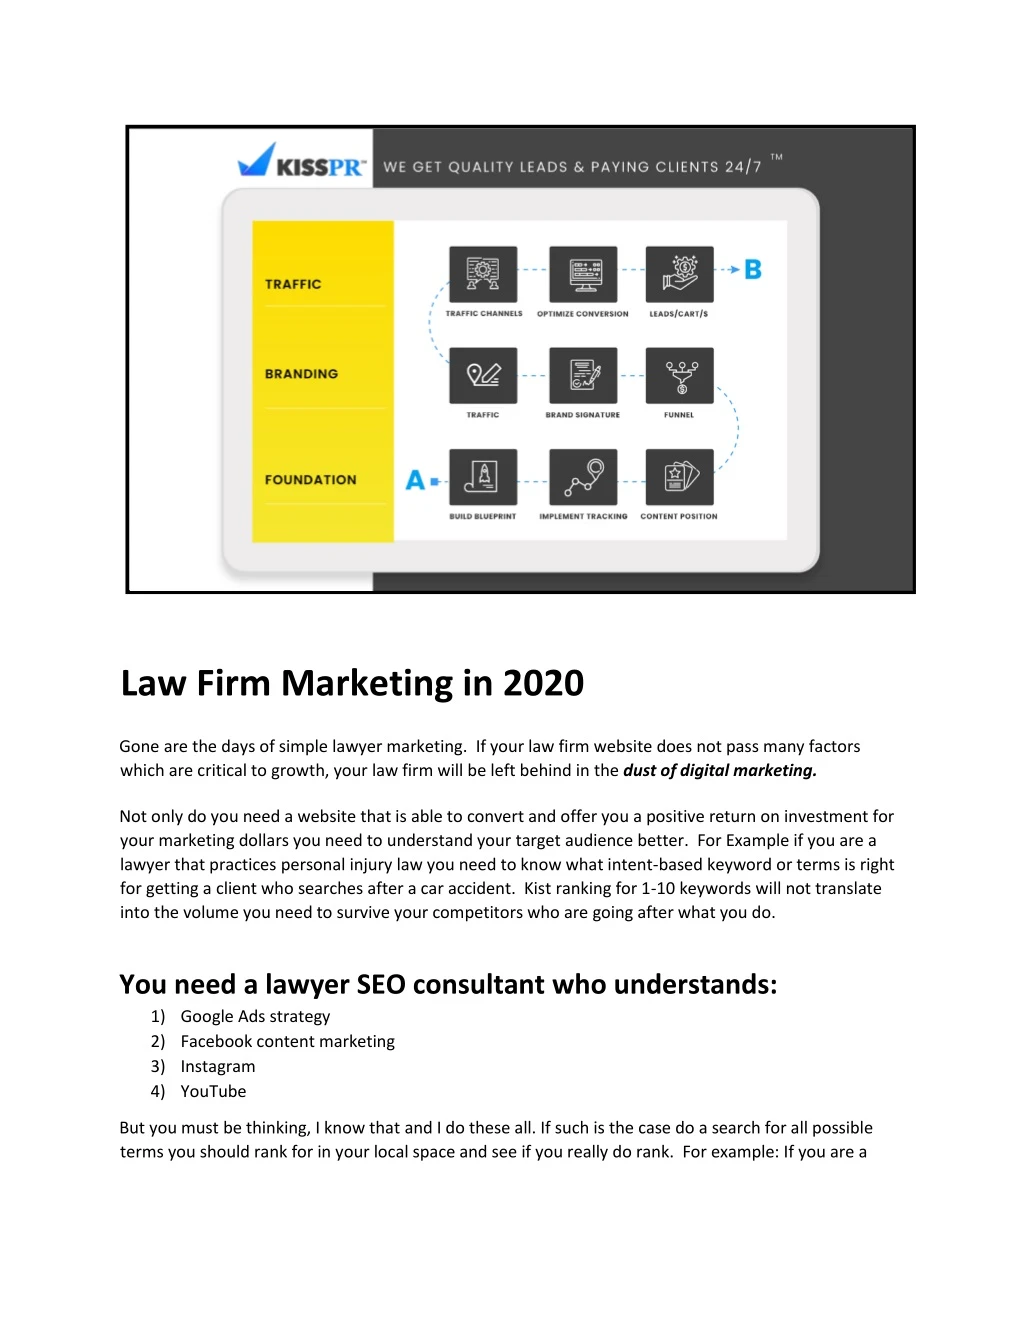 law firm marketing in 2020 gone are the days